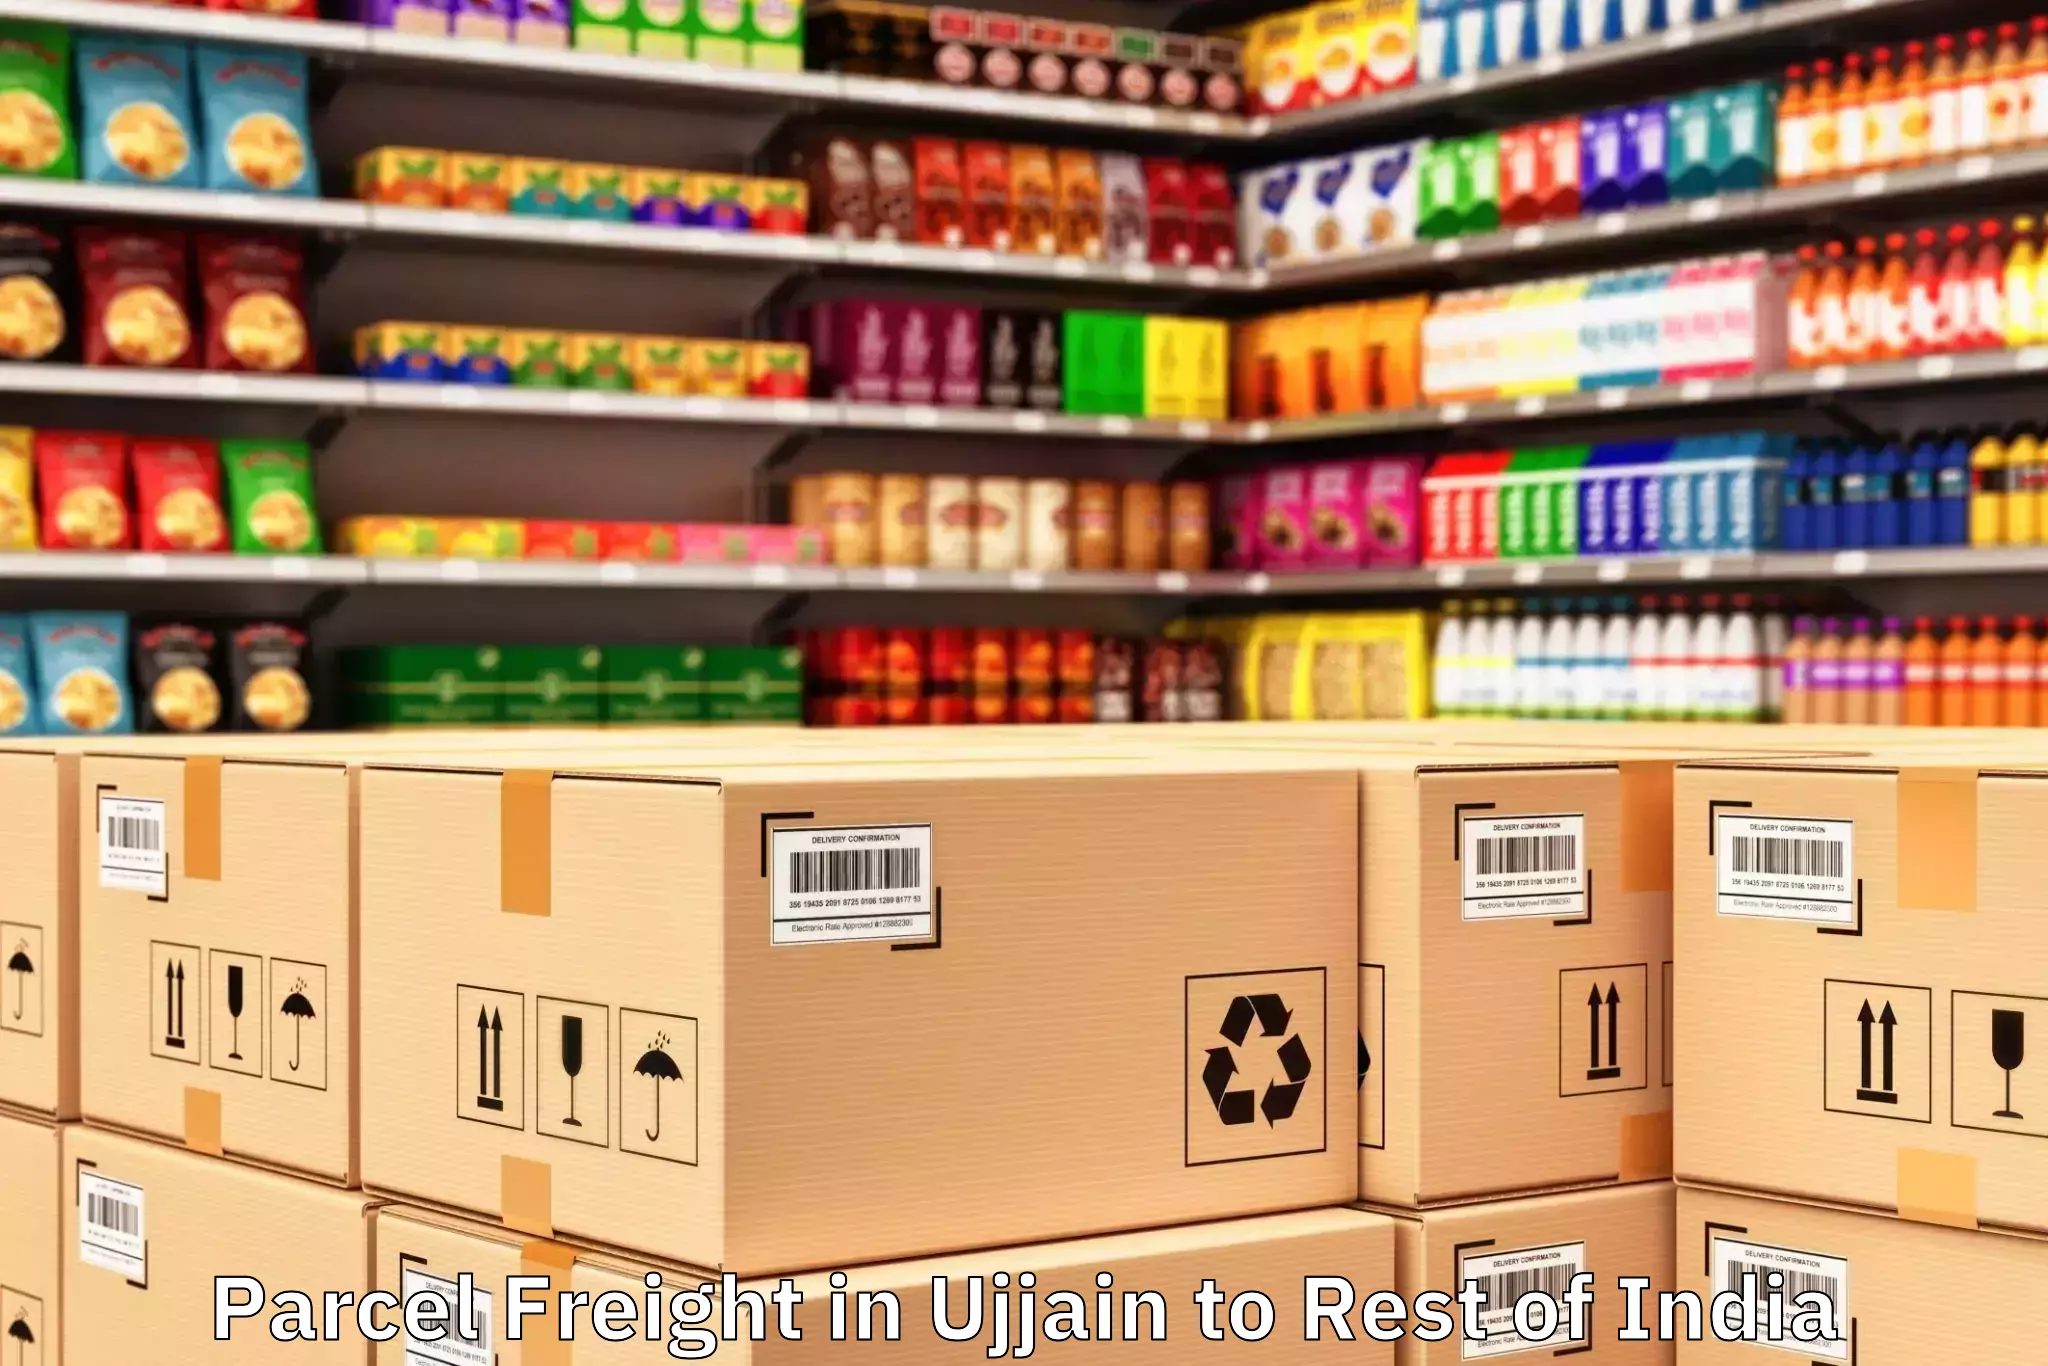 Easy Ujjain to Rest Of India Parcel Freight Booking